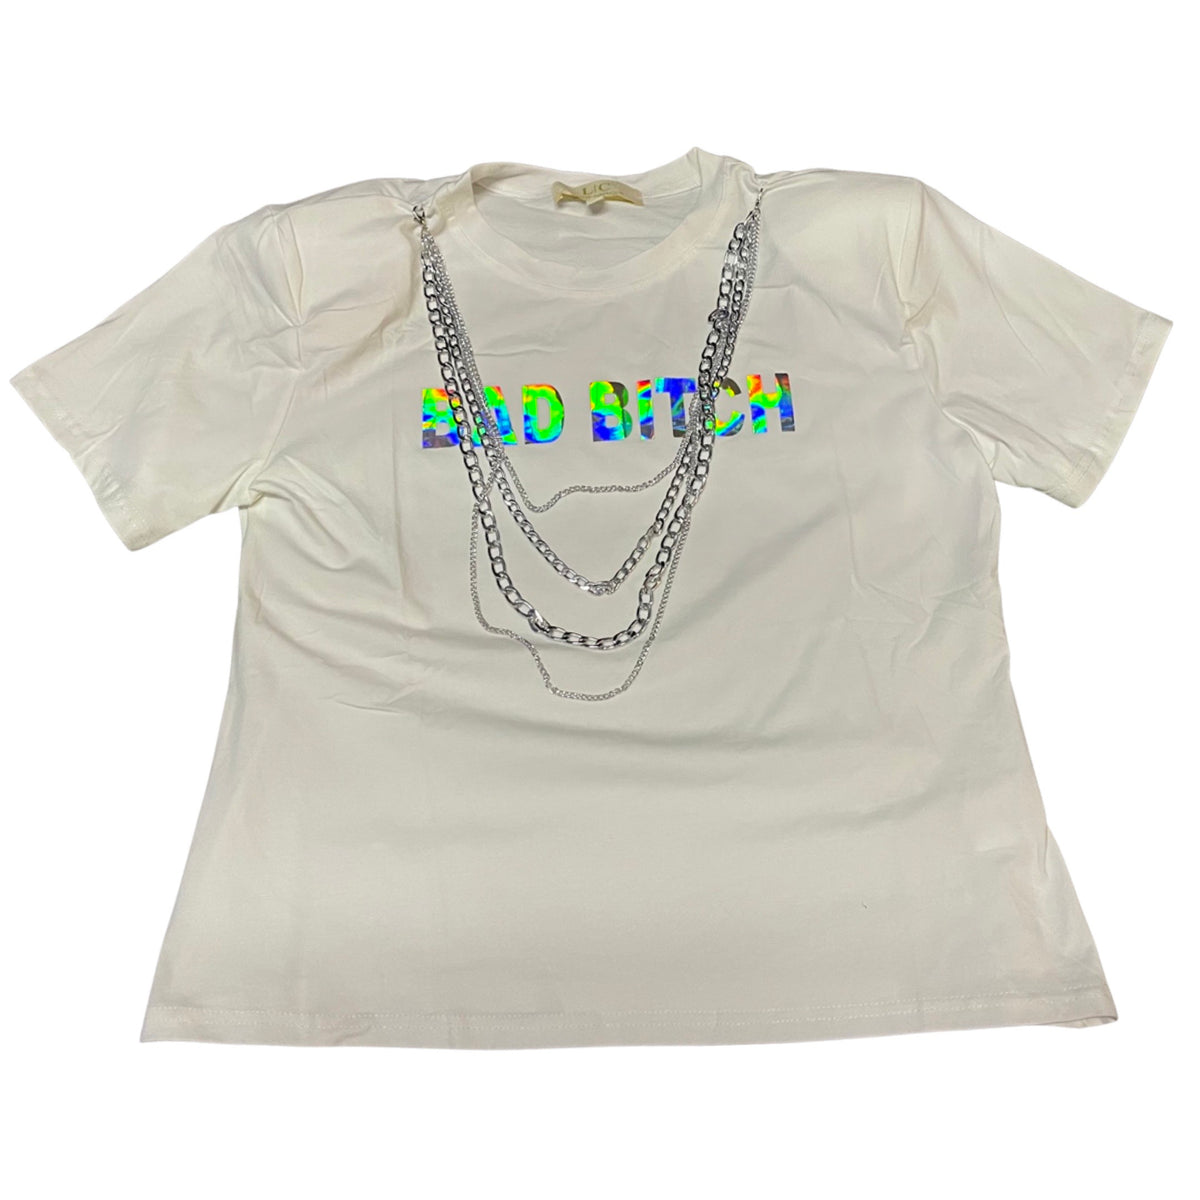 JUST BAD WHITE CHAINED SHIRT